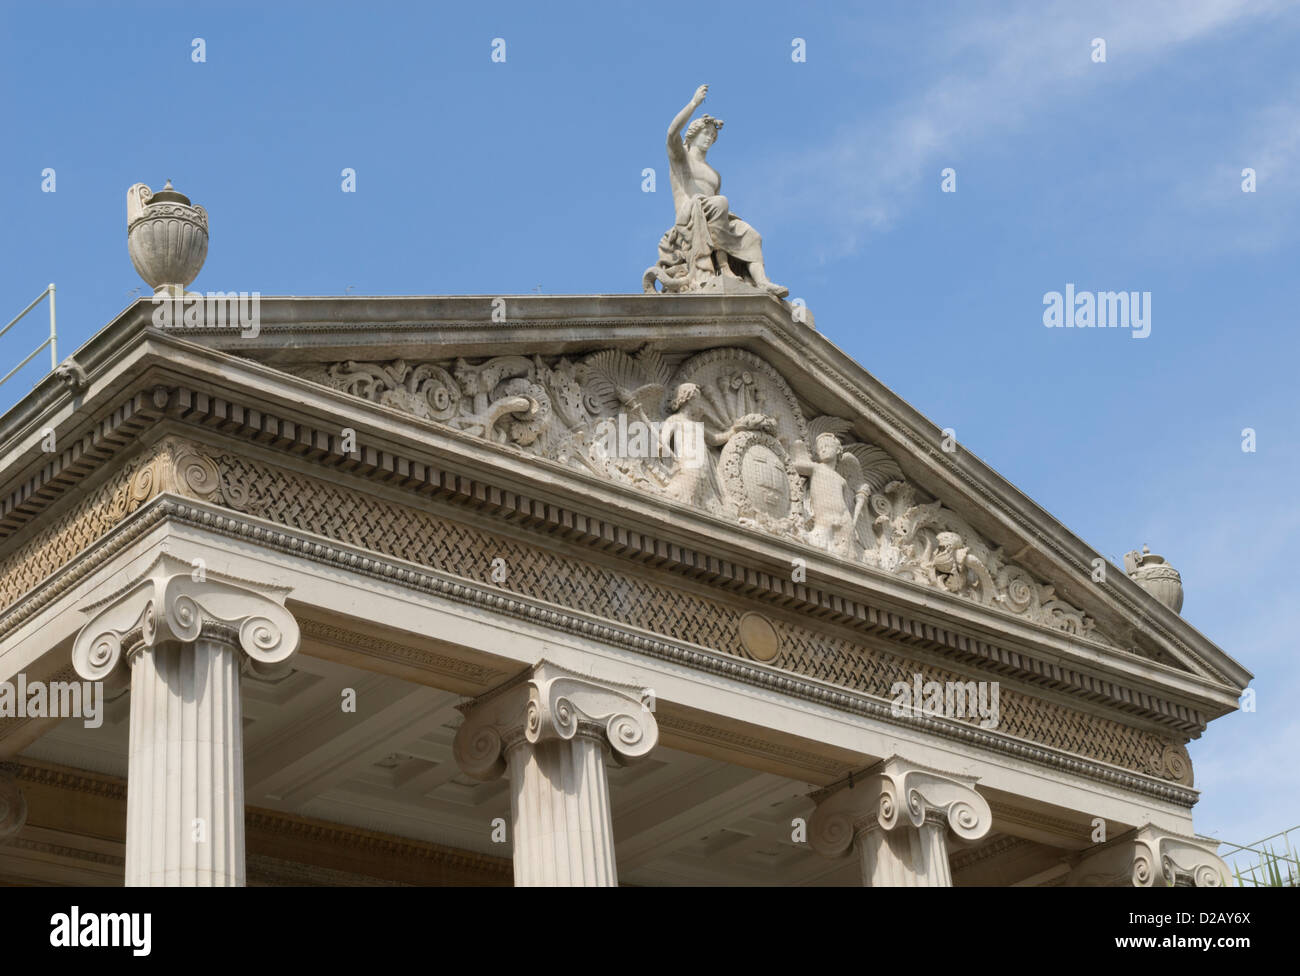 Detail of the pediment above the portico at the entrance to the Ashmolean Museum, Beaumont Street, Oxford, Oxfordshire, England Stock Photo